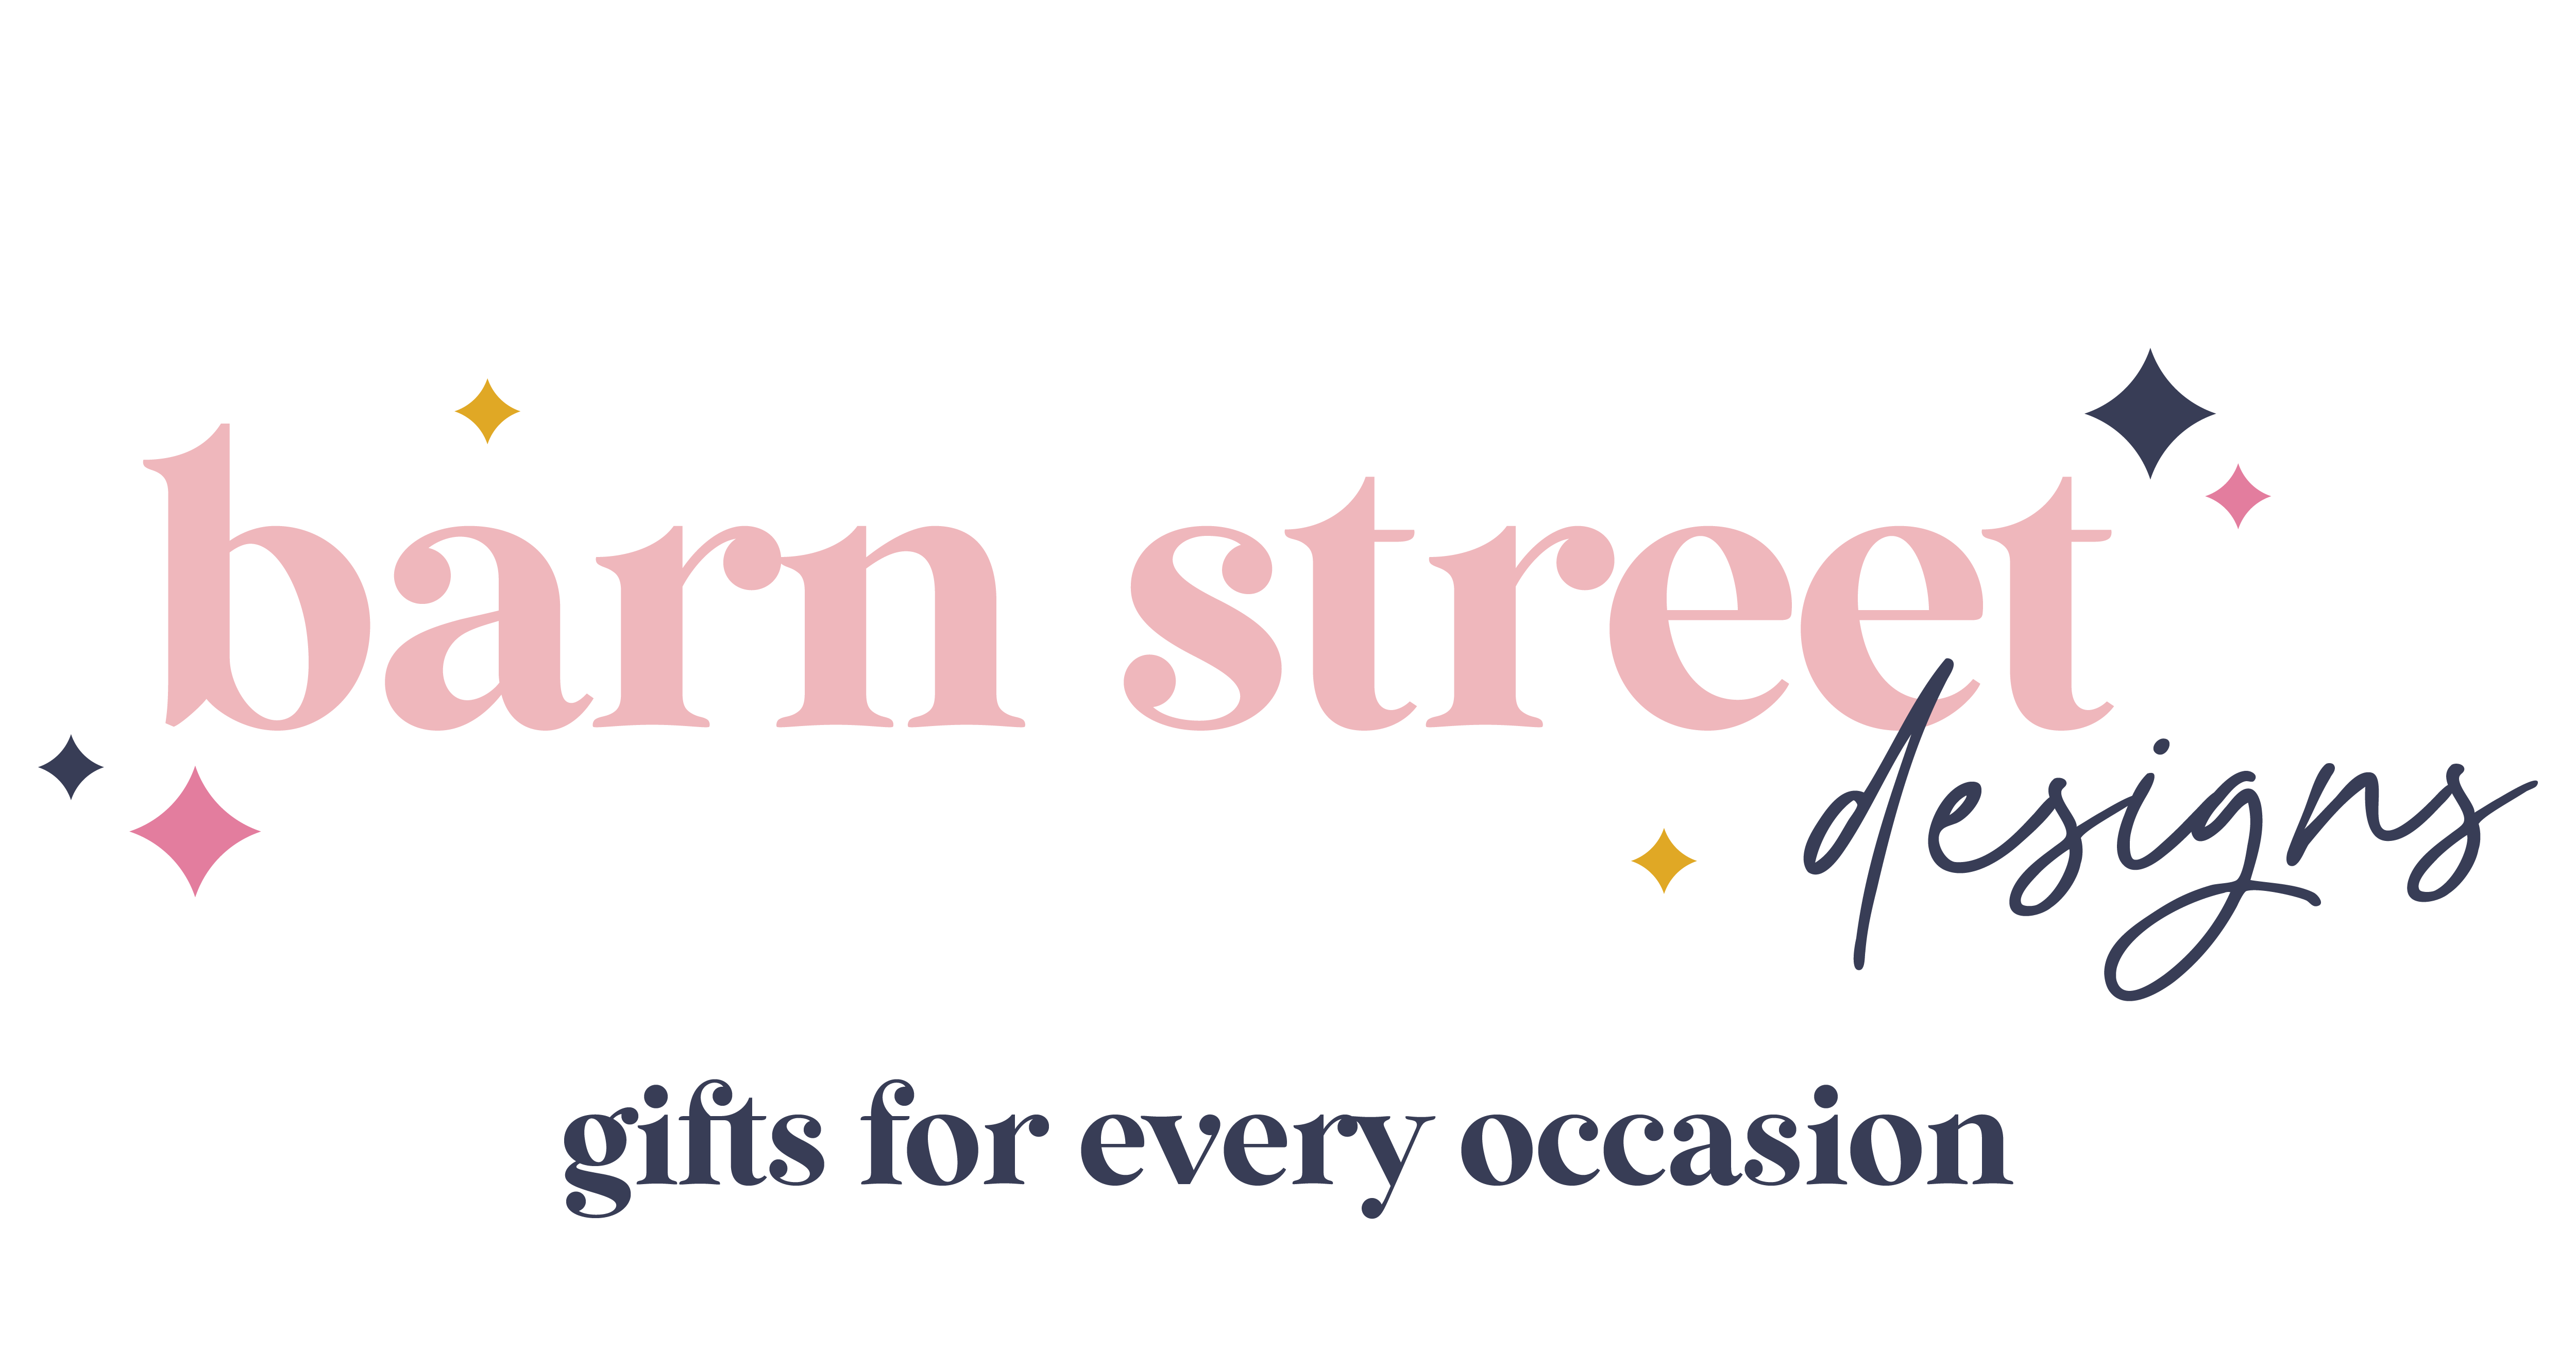 Personalized Gifts for Every Occasion | Barn Street Designs